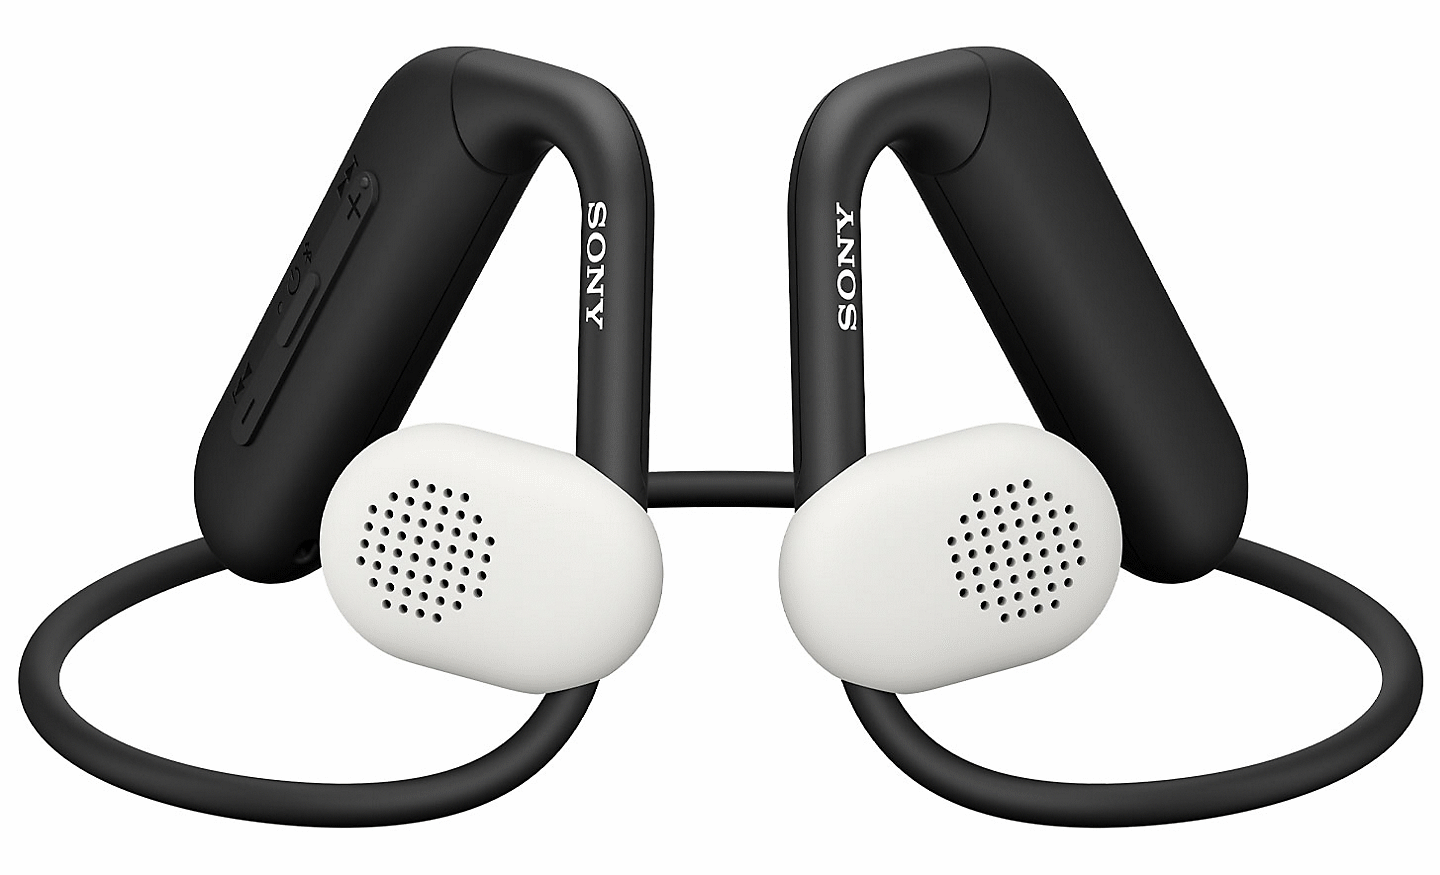 Image of the Sony Float Run headphones on a white background